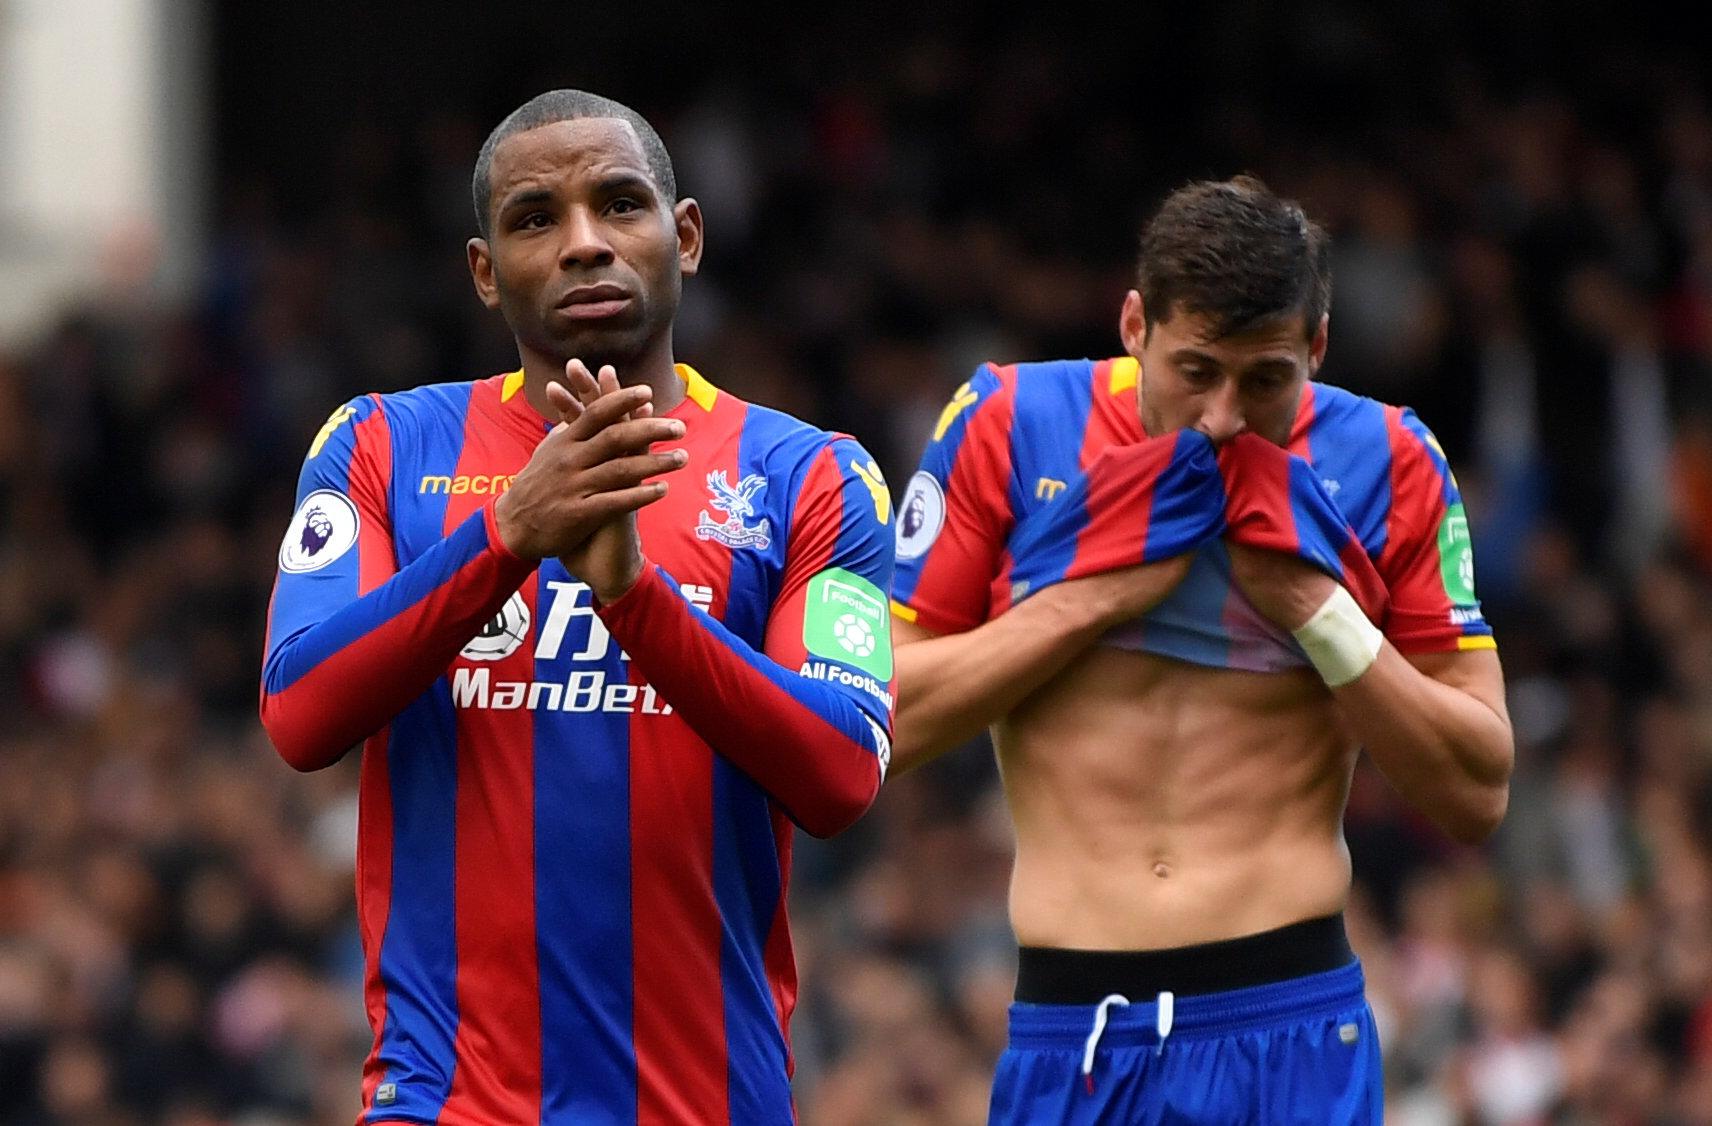 Puncheon To Depart Palace